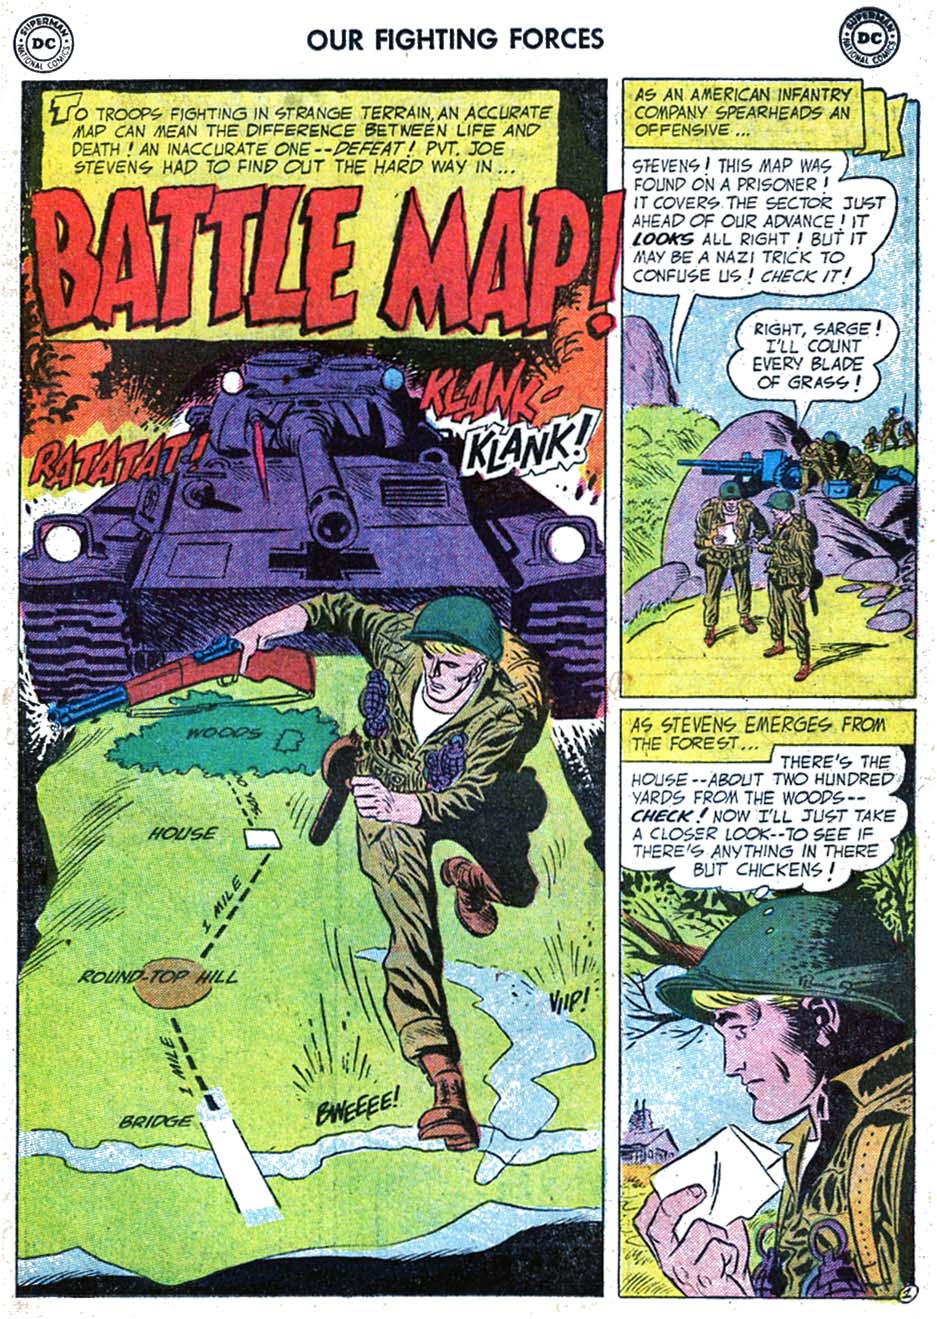 Read online Our Fighting Forces comic -  Issue #9 - 19